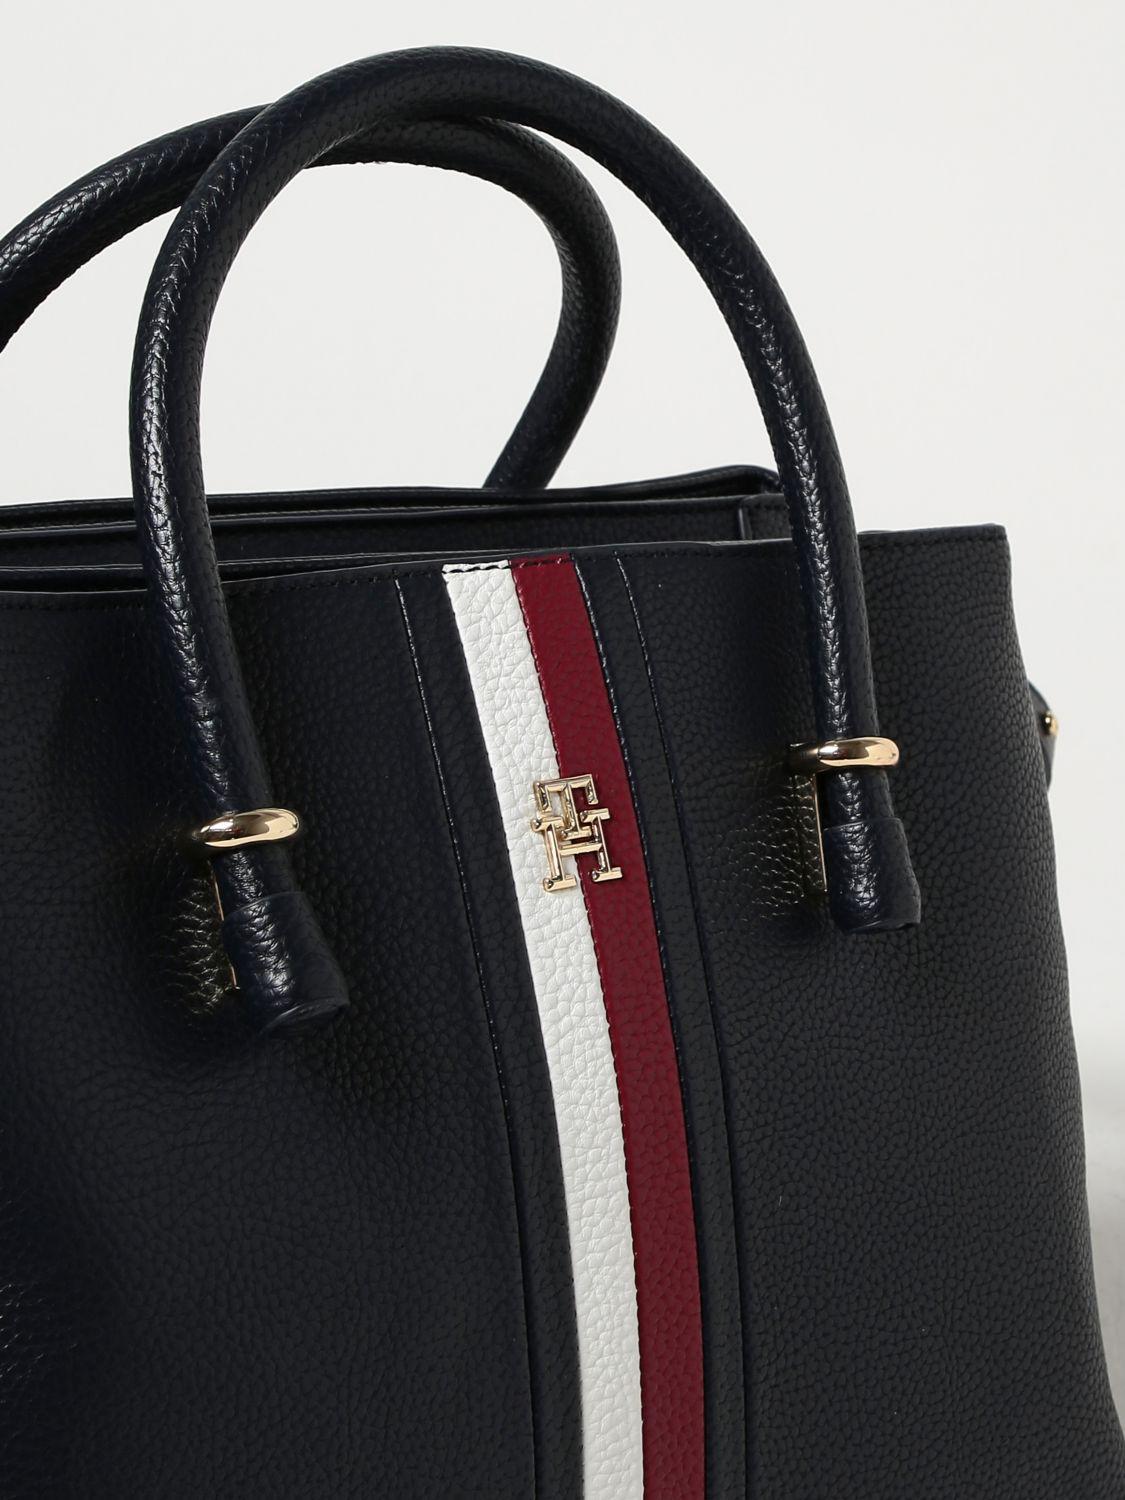 NEW TOMMY HILFIGER MEDIUM CROSSBODY BAG With POUCH MSRP: $98